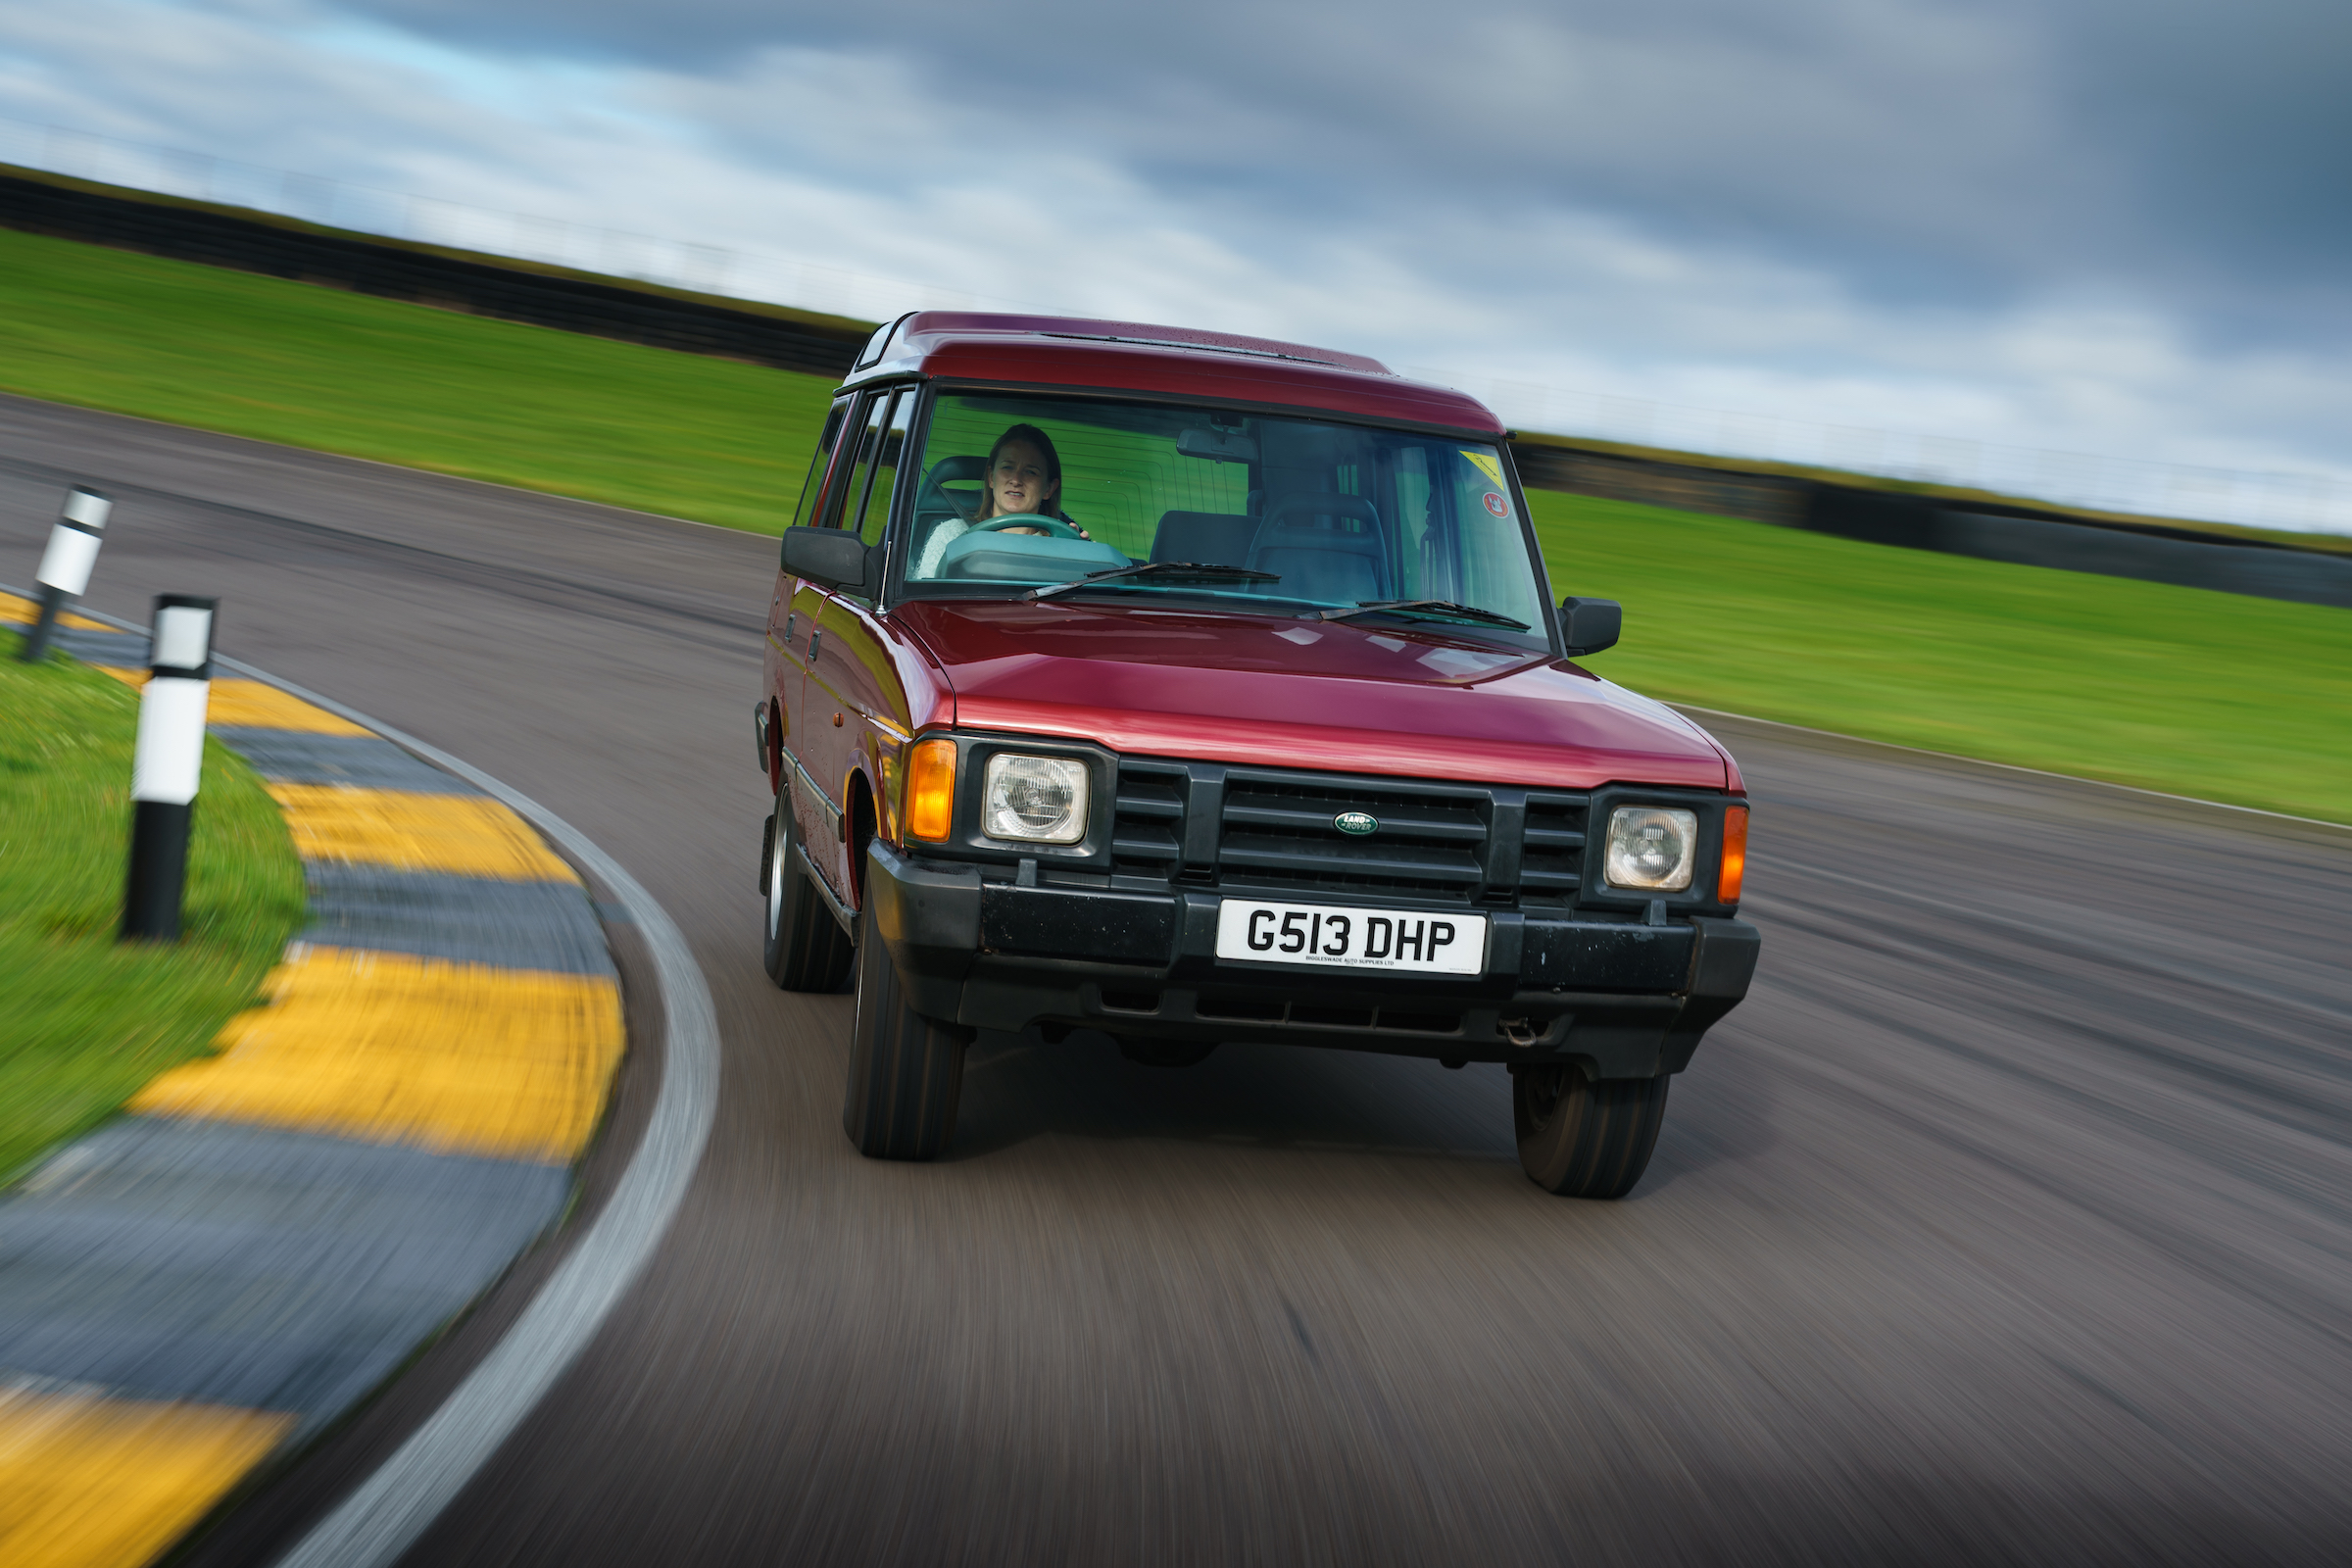 JLR creative chief: Range Rover, Defender, Discovery brands bring “clarity” for buyers